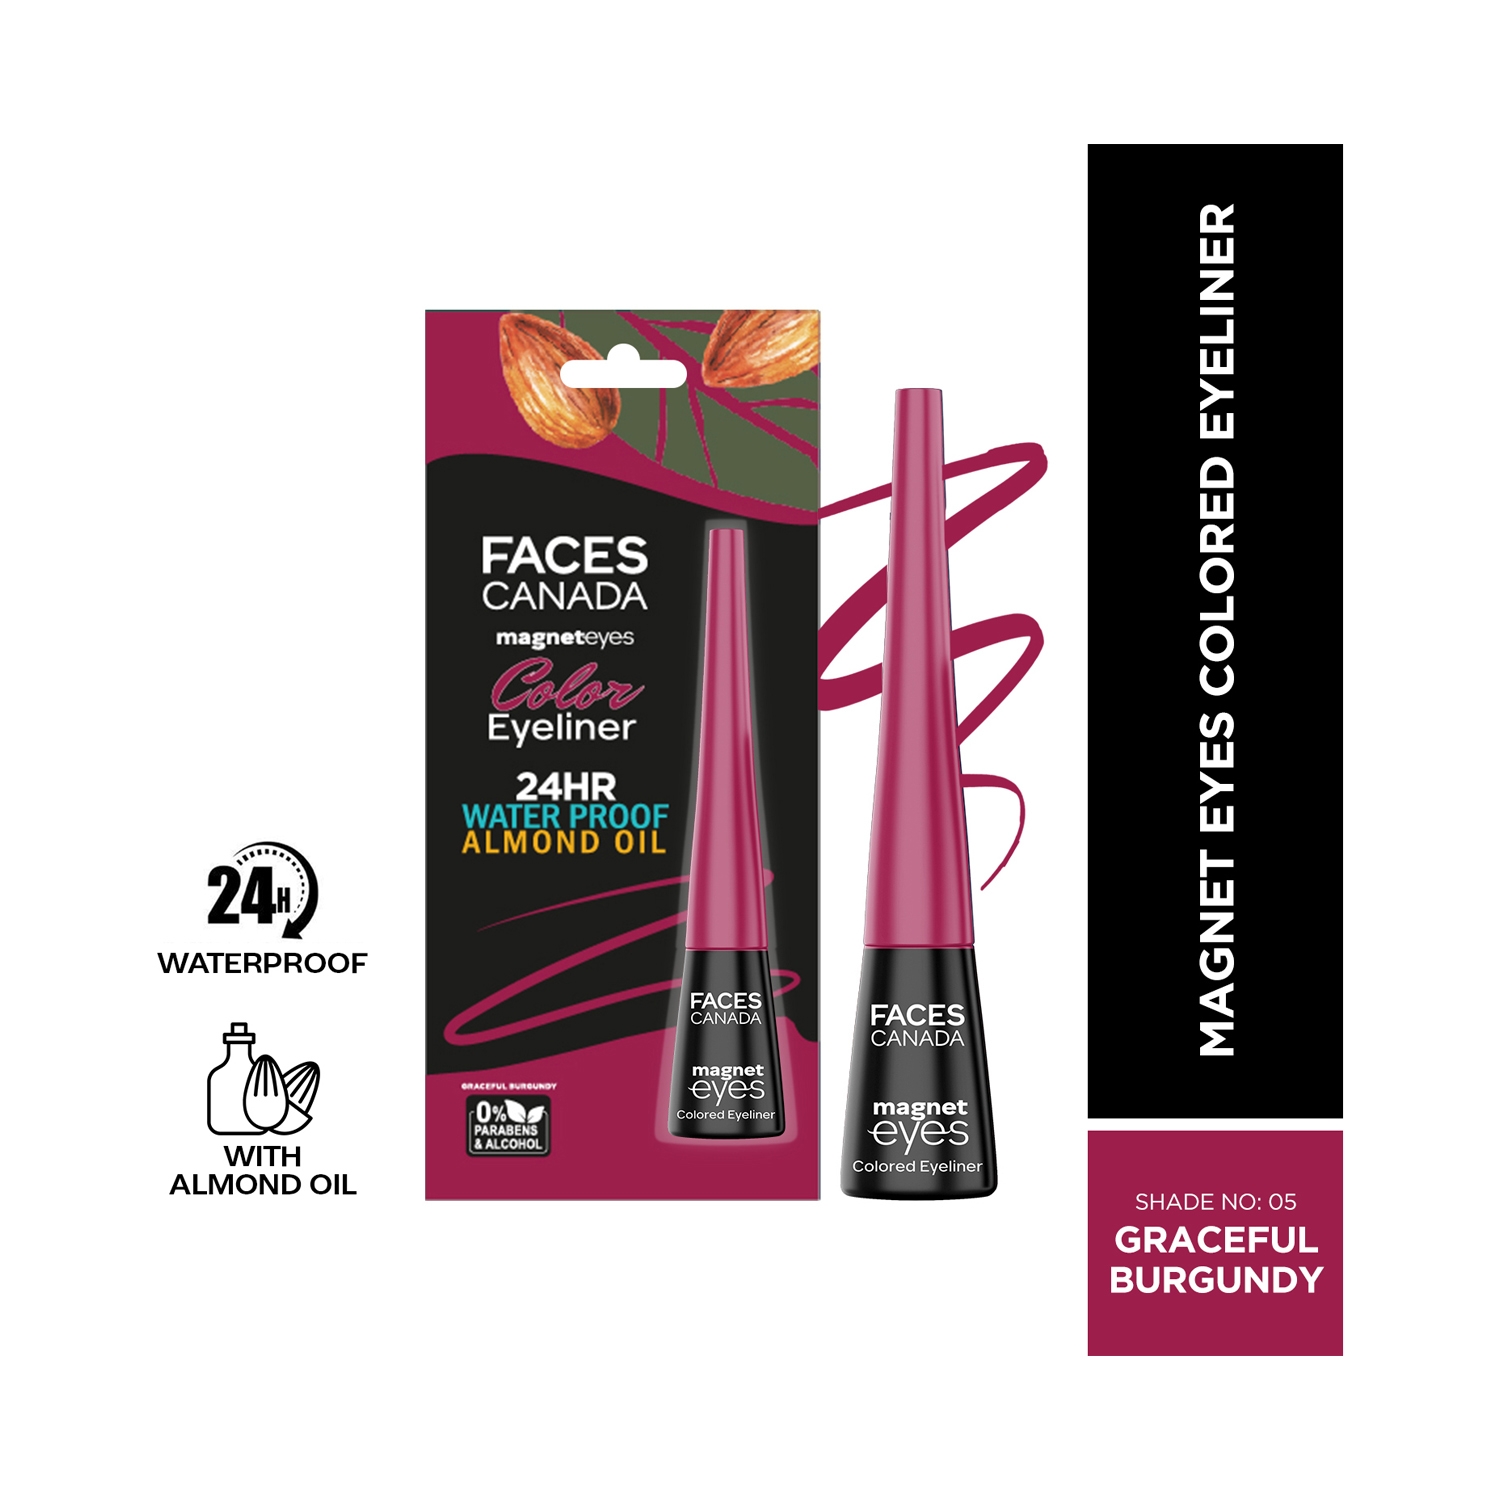 Faces Canada | Faces Canada Magneteyes Colored Eyeliner - 05 Graceful Burgundy (4ml)